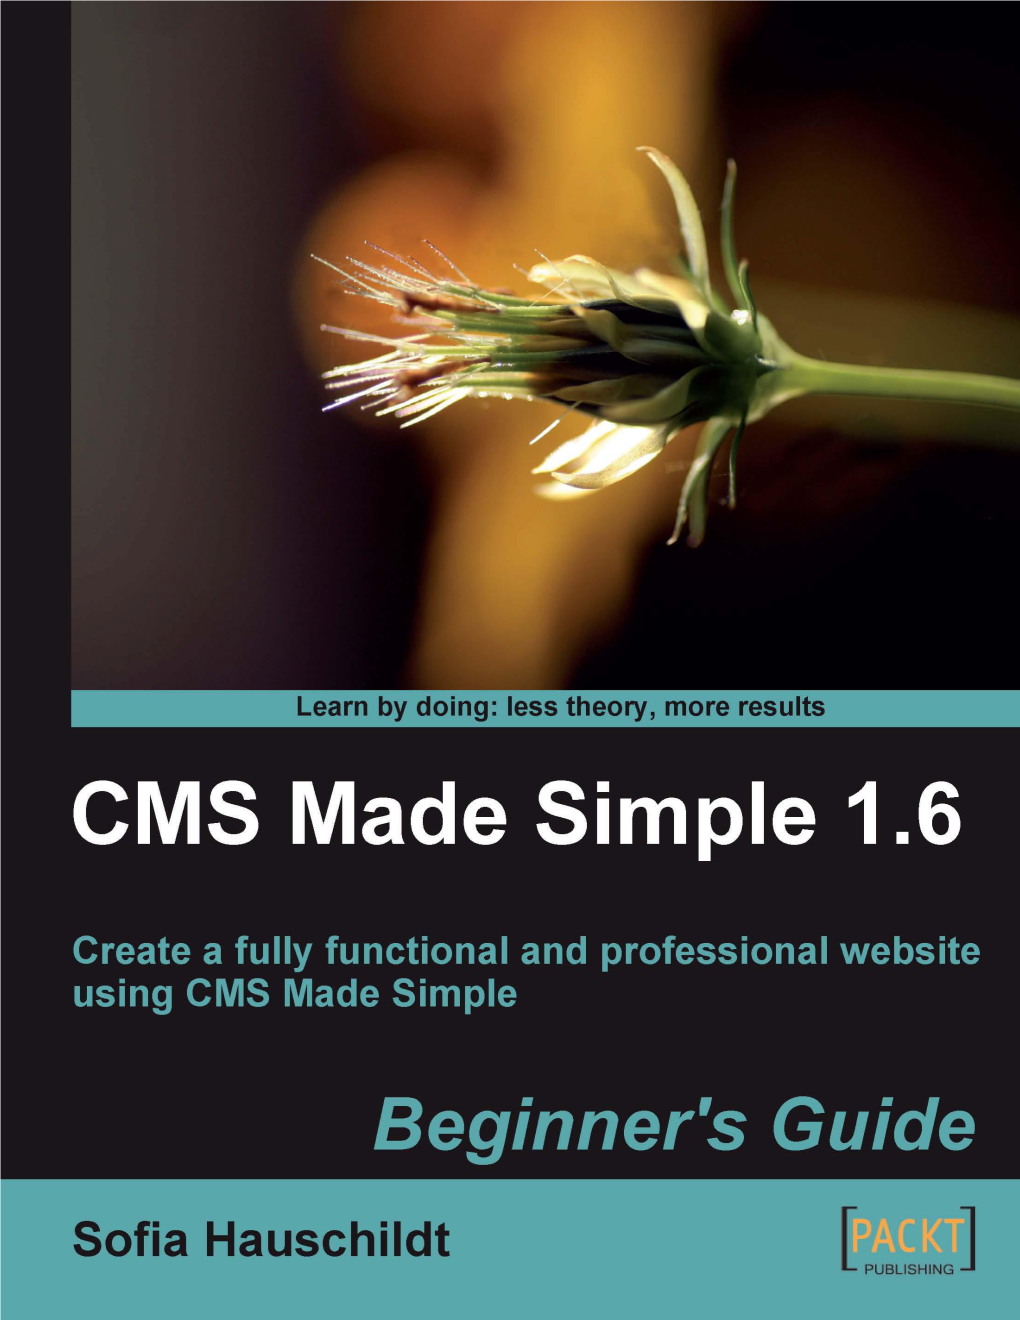 Building Websites with CMS Made Simple